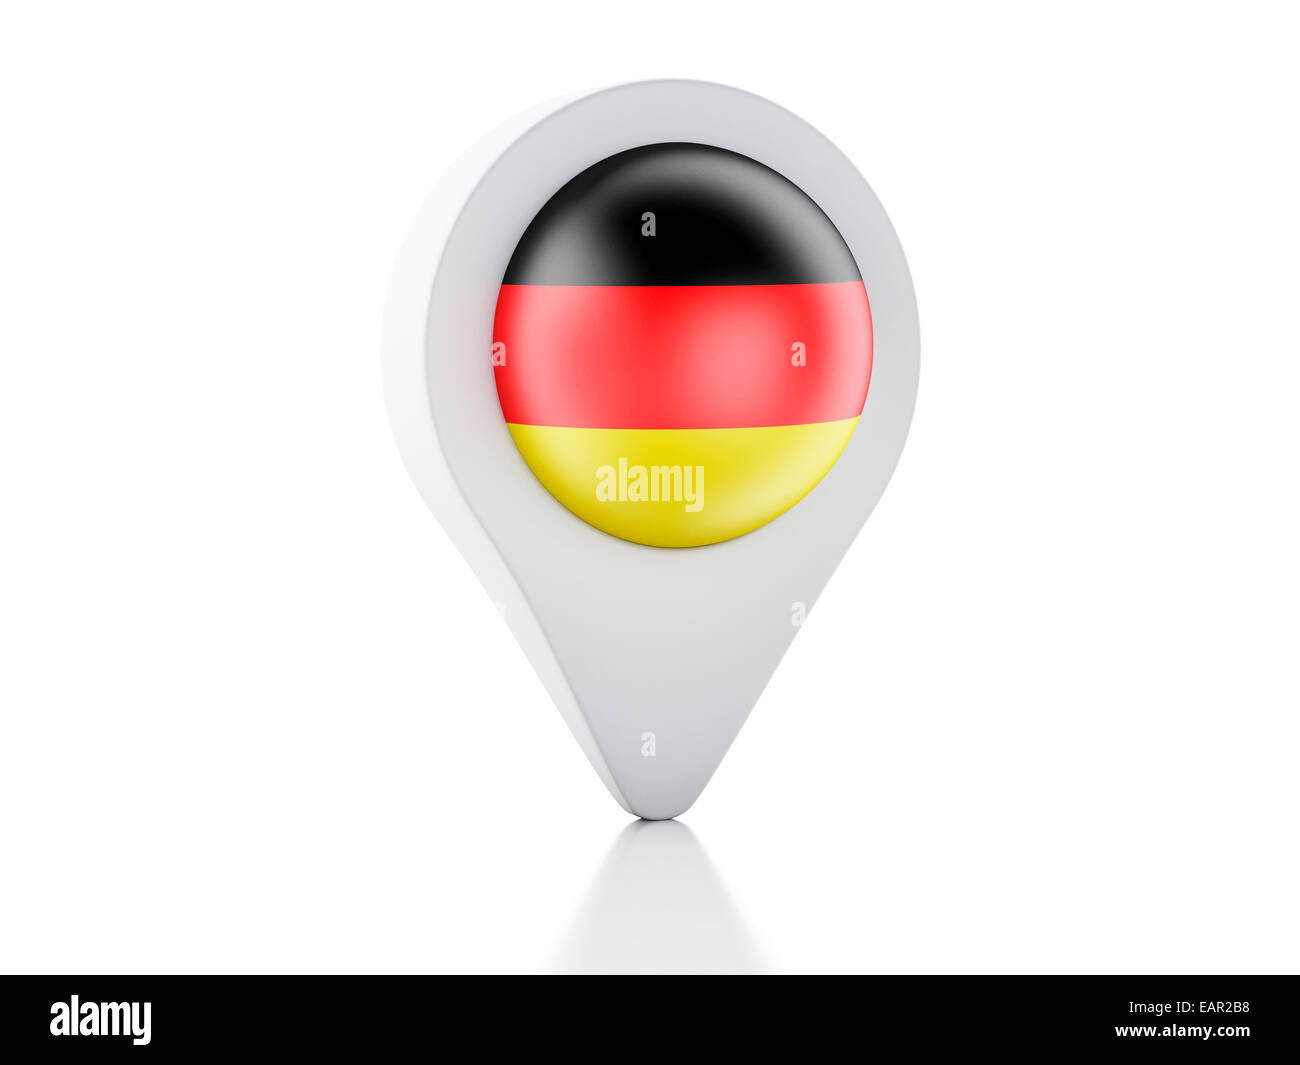 german flag icon png